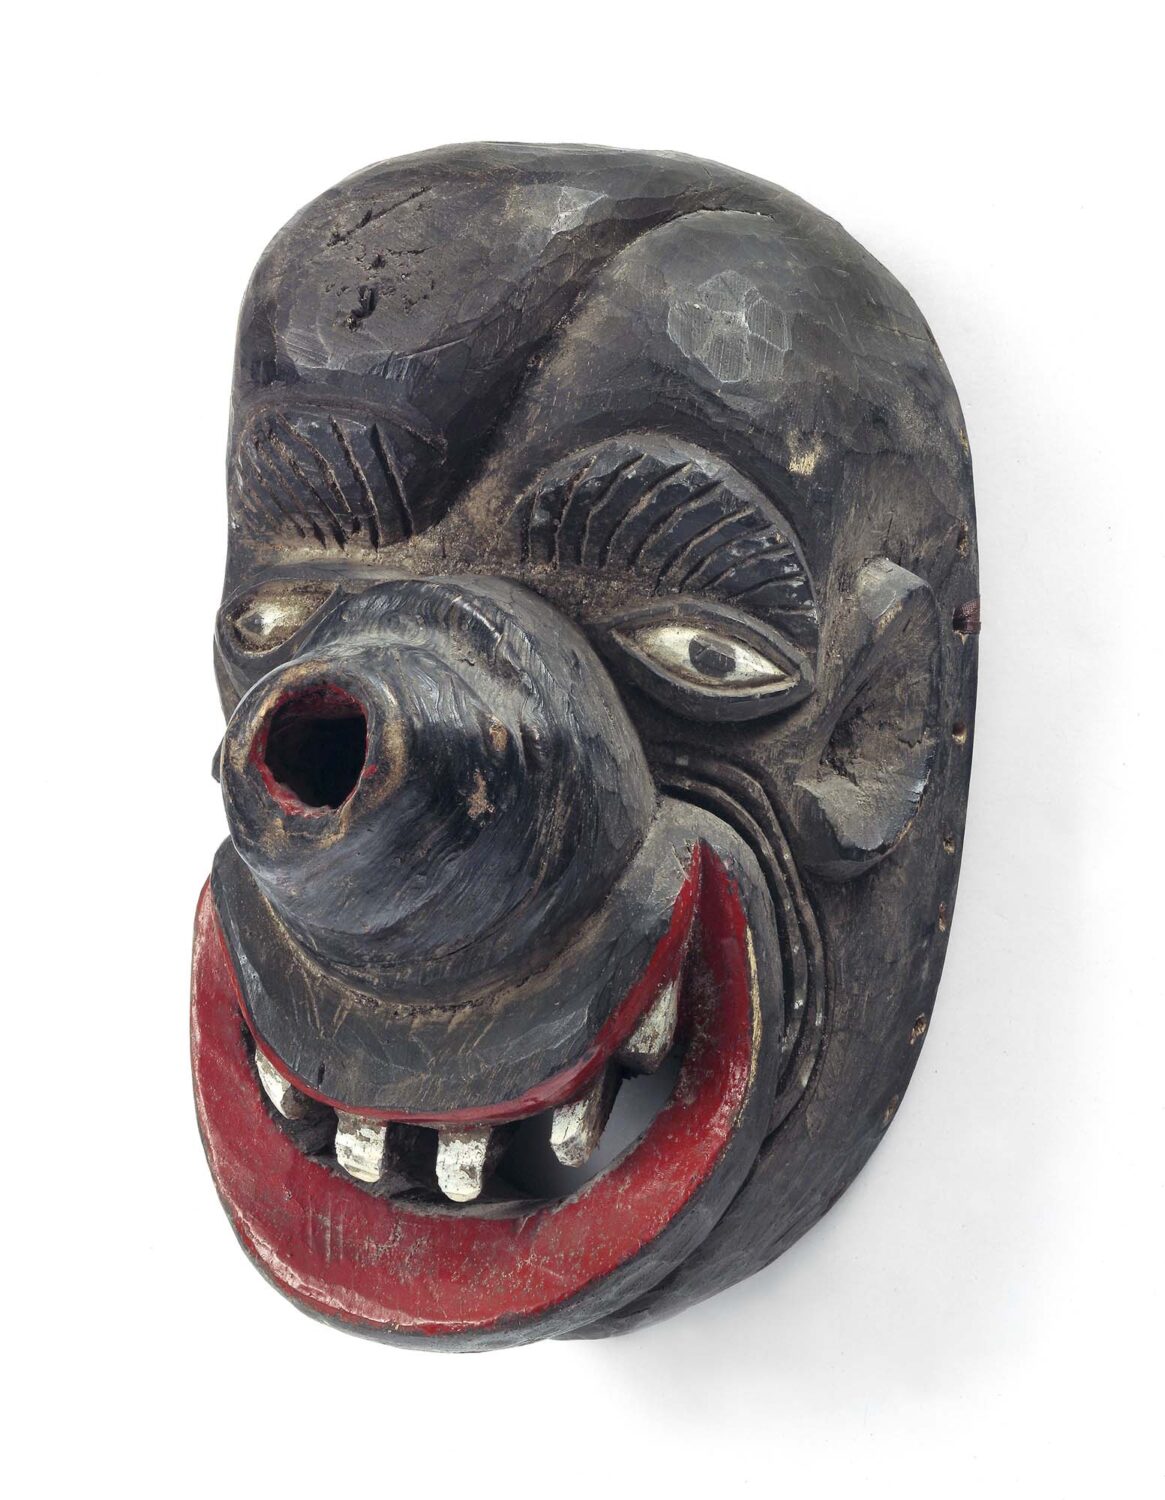 thumbnail of Ekpo Society mask made with wood with black, red and white pigments.